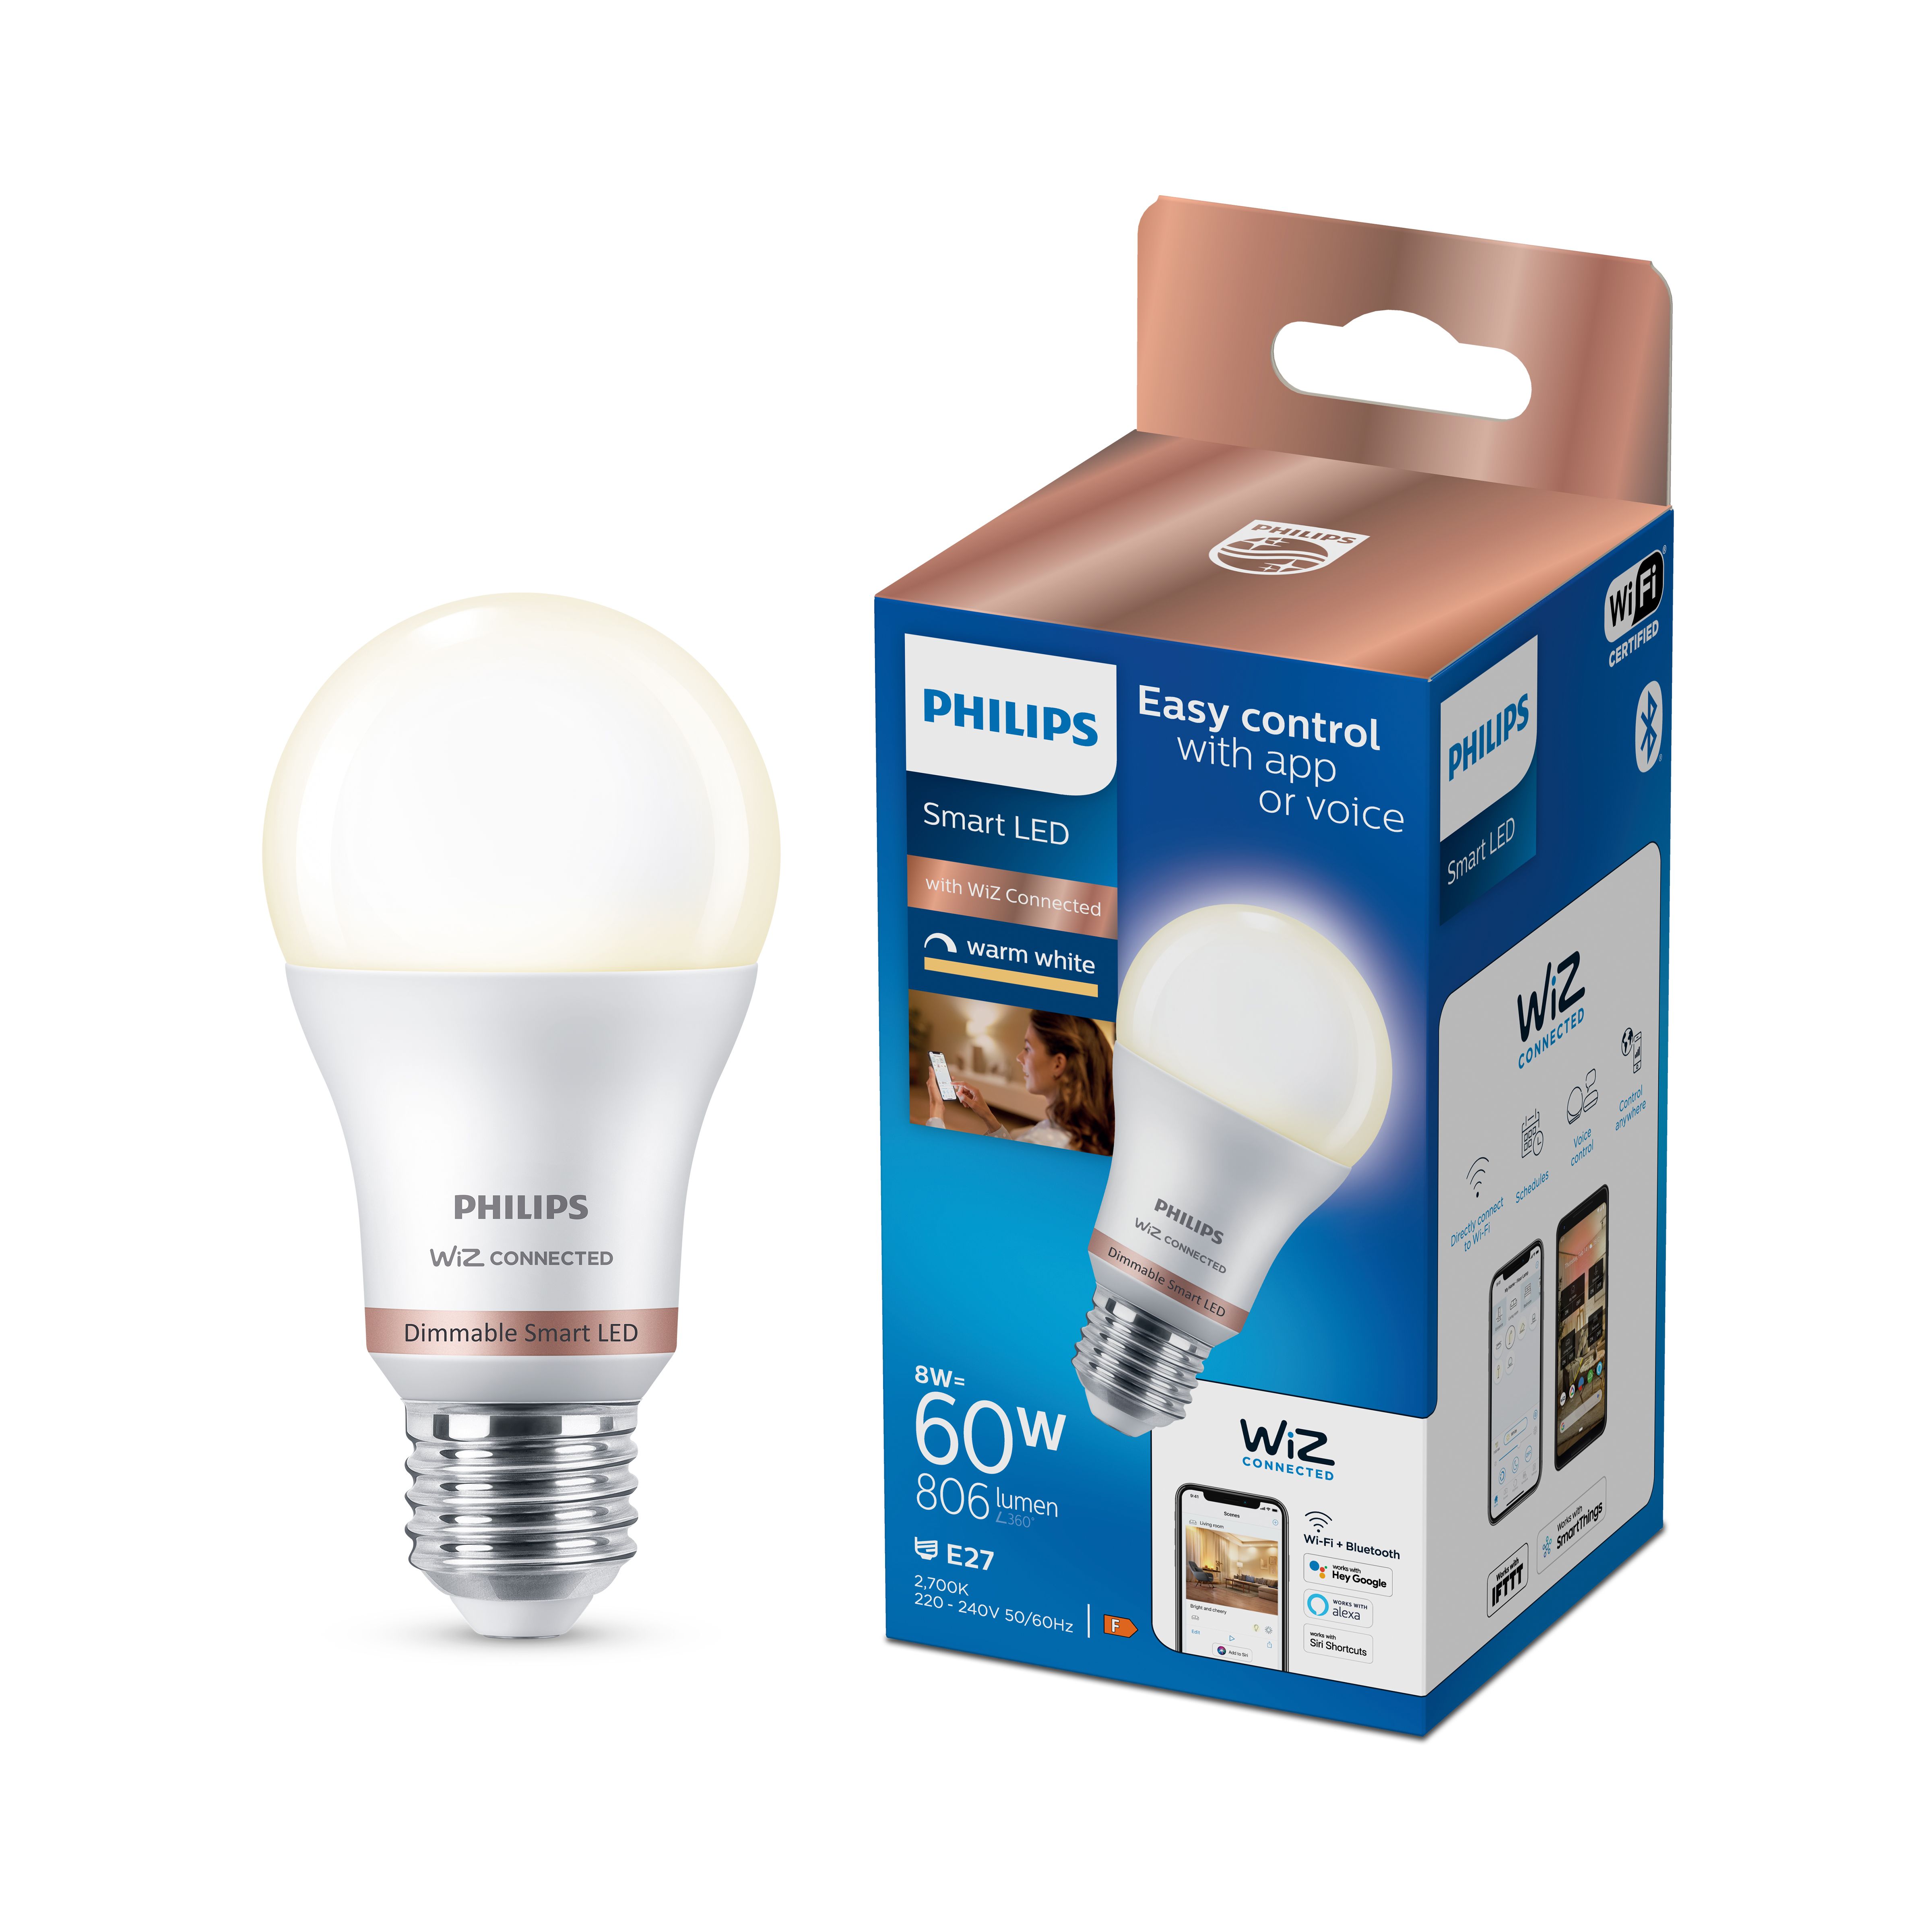 https://media.diy.com/is/image/Kingfisher/philips-wiz-e27-60w-led-cool-white-a60-non-dimmable-light-bulb~8719514372566_02c_bq?$MOB_PREV$&$width=618&$height=618